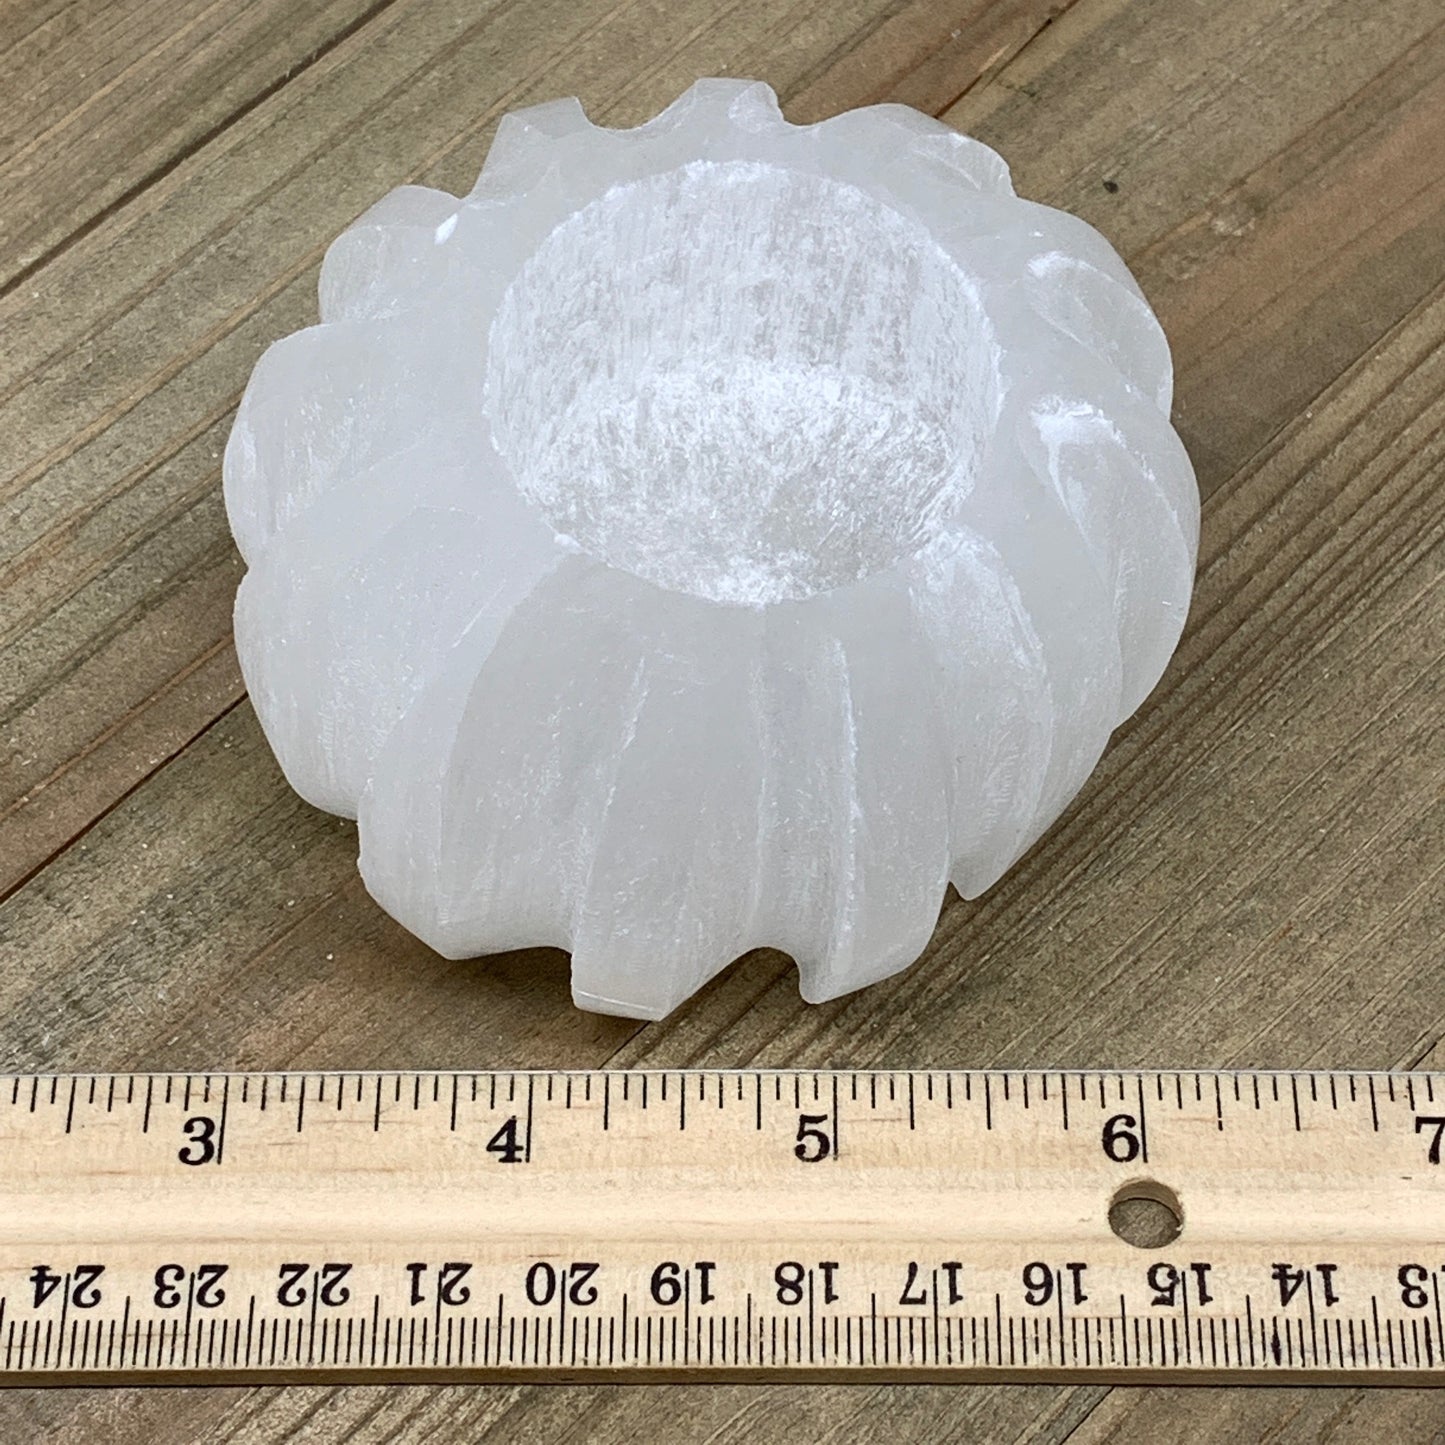 1pc,340-360g, 3.3"x1.9" White Selenite Candle Holder Round Shape from Morocco